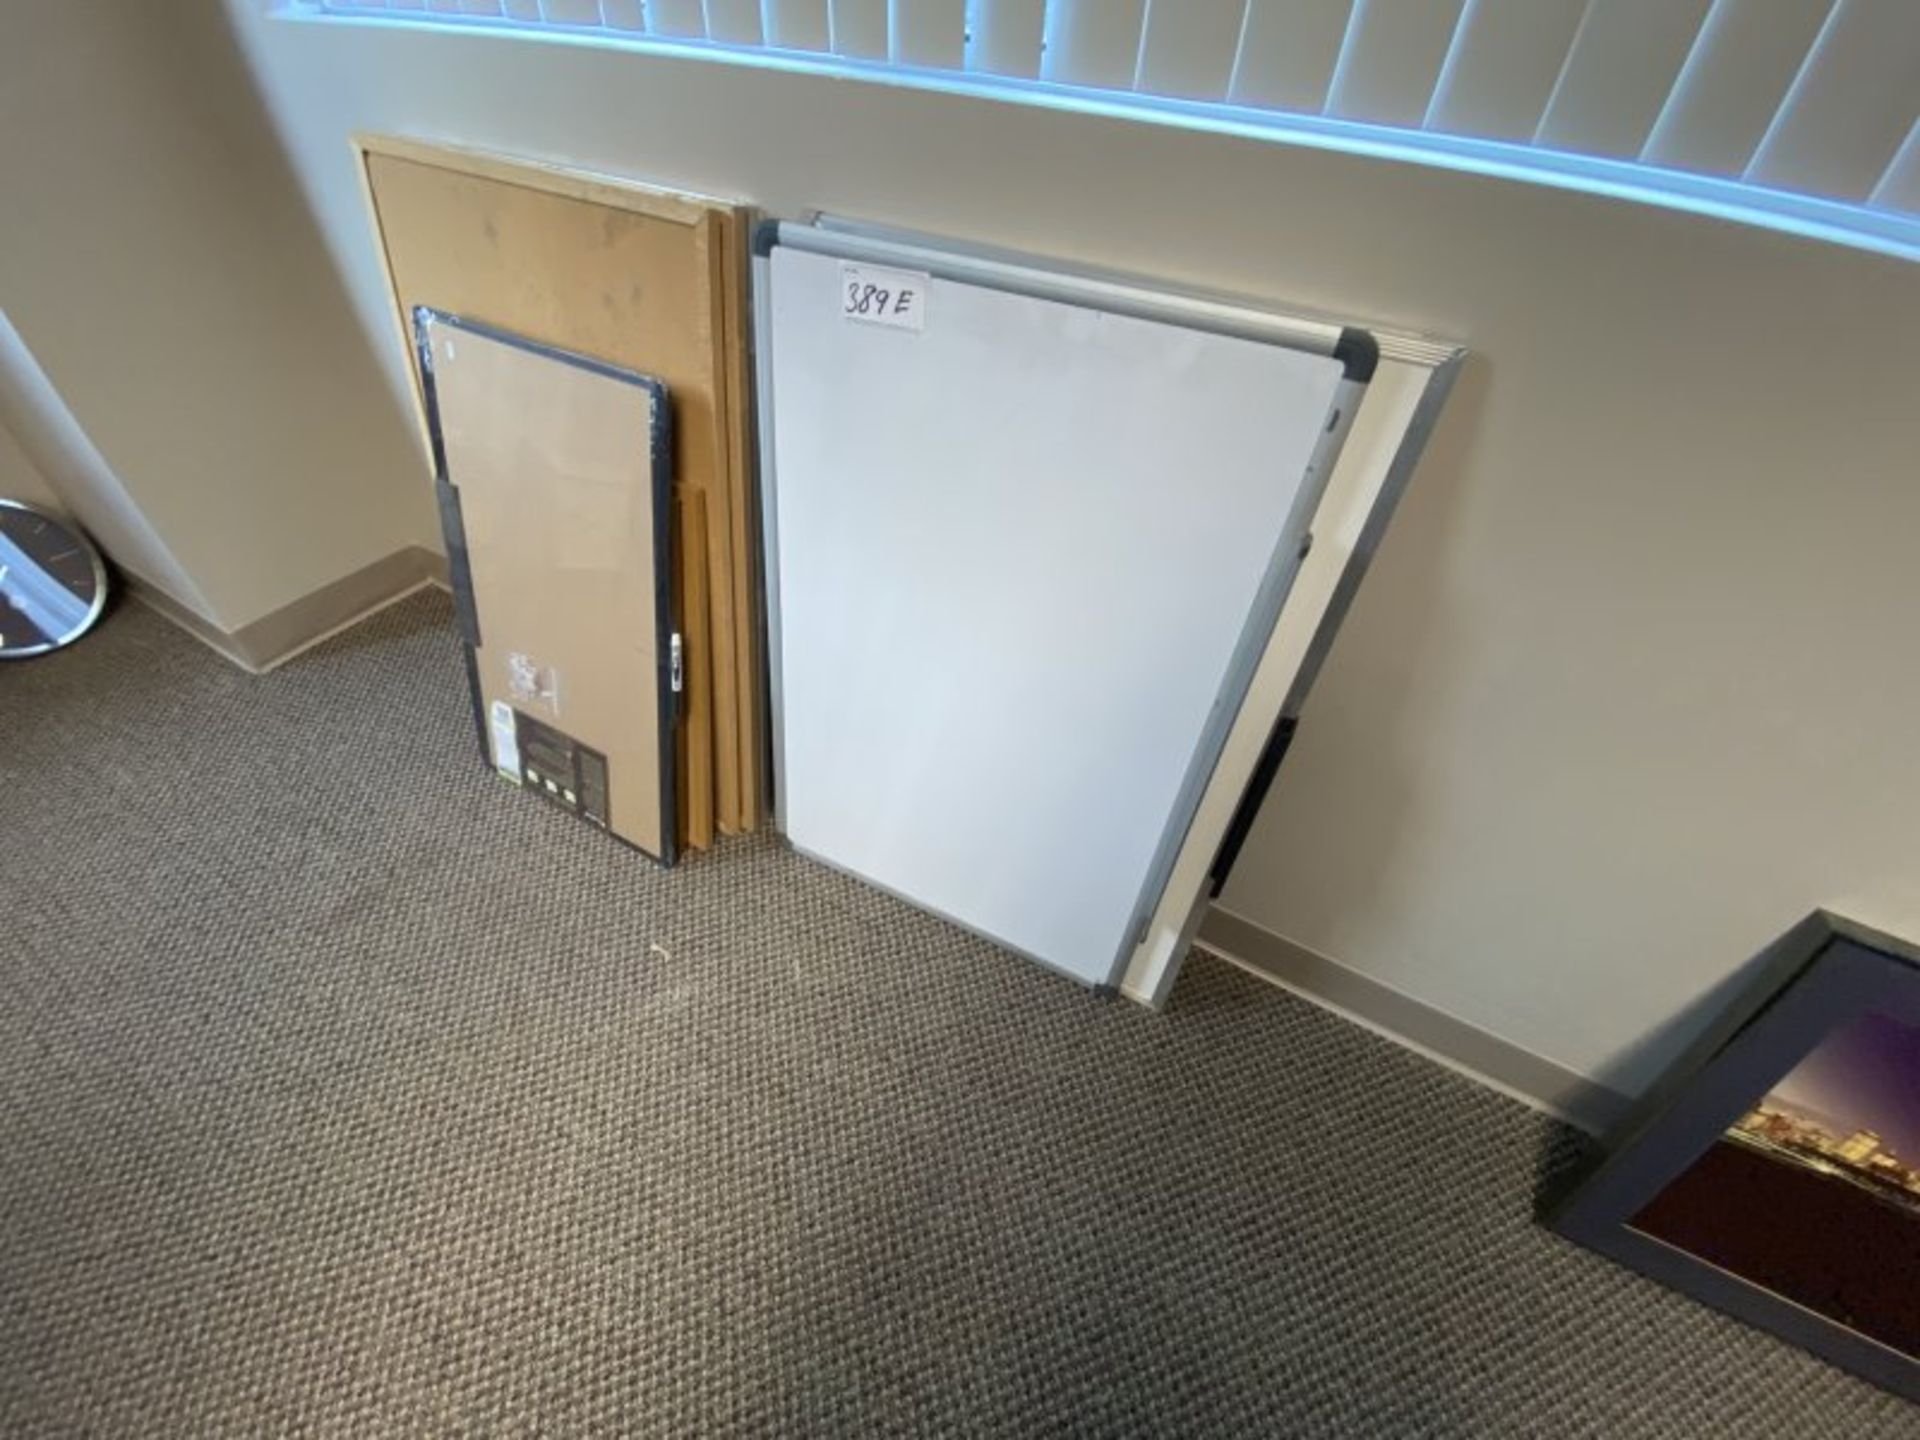 CORK AND WHITE BOARDS